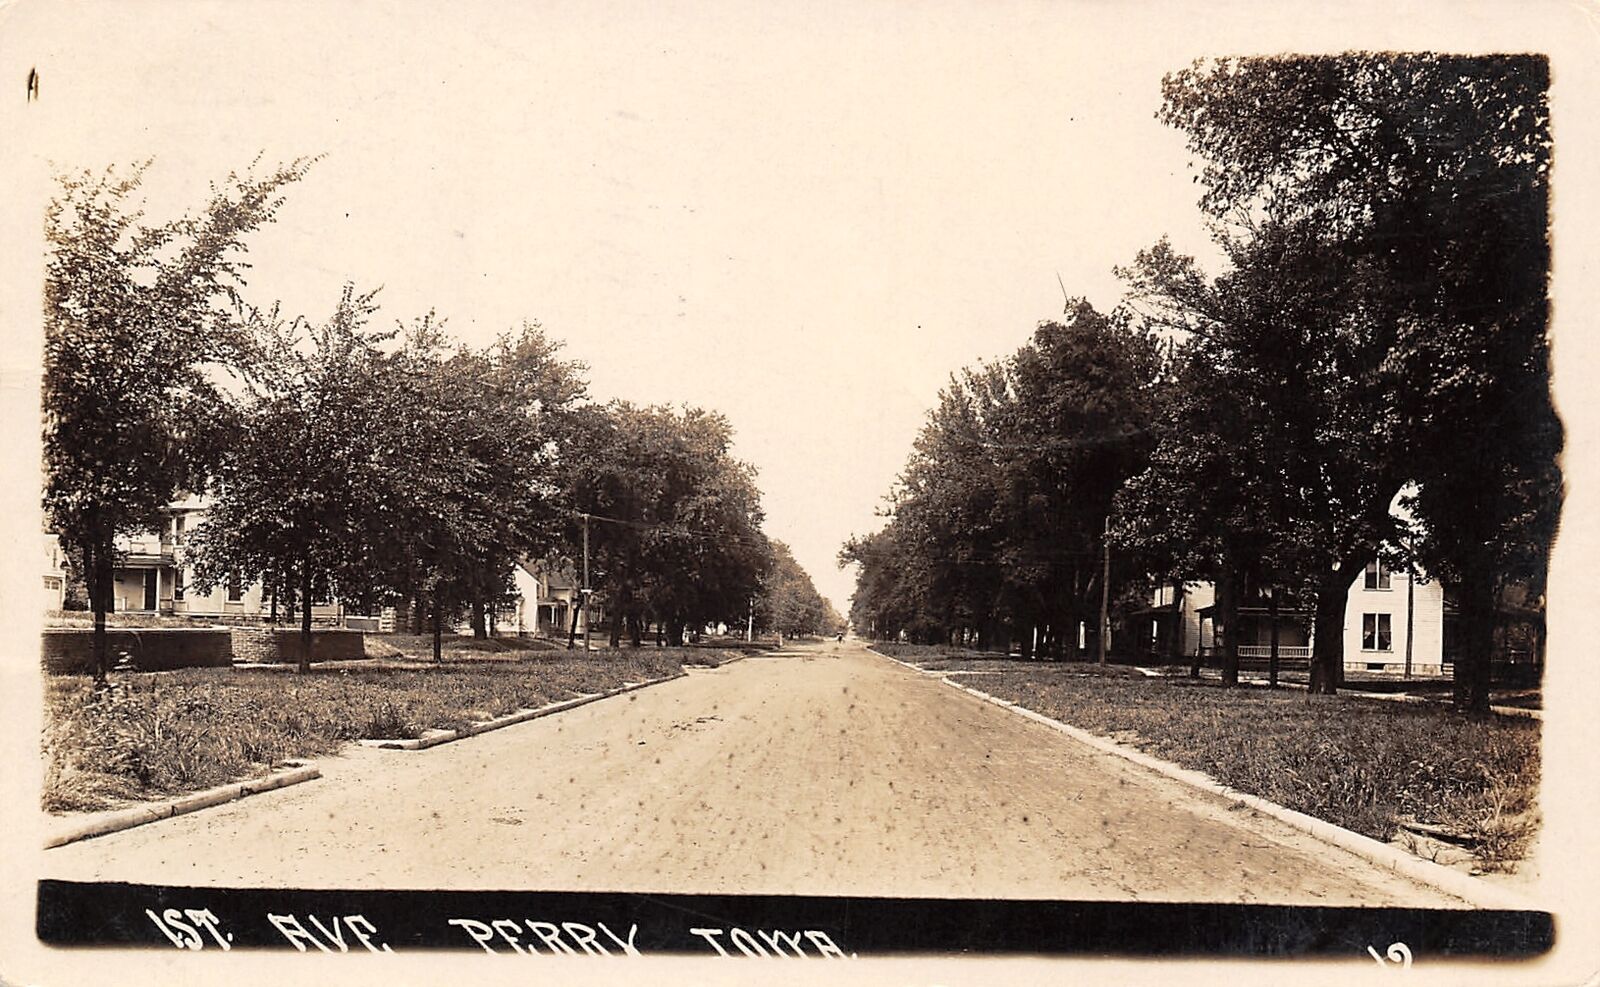 Perry Iowa~First 1st Avenue Homes~Wide Gravel Road~Arrived 11:27 Train~1912 RPPC